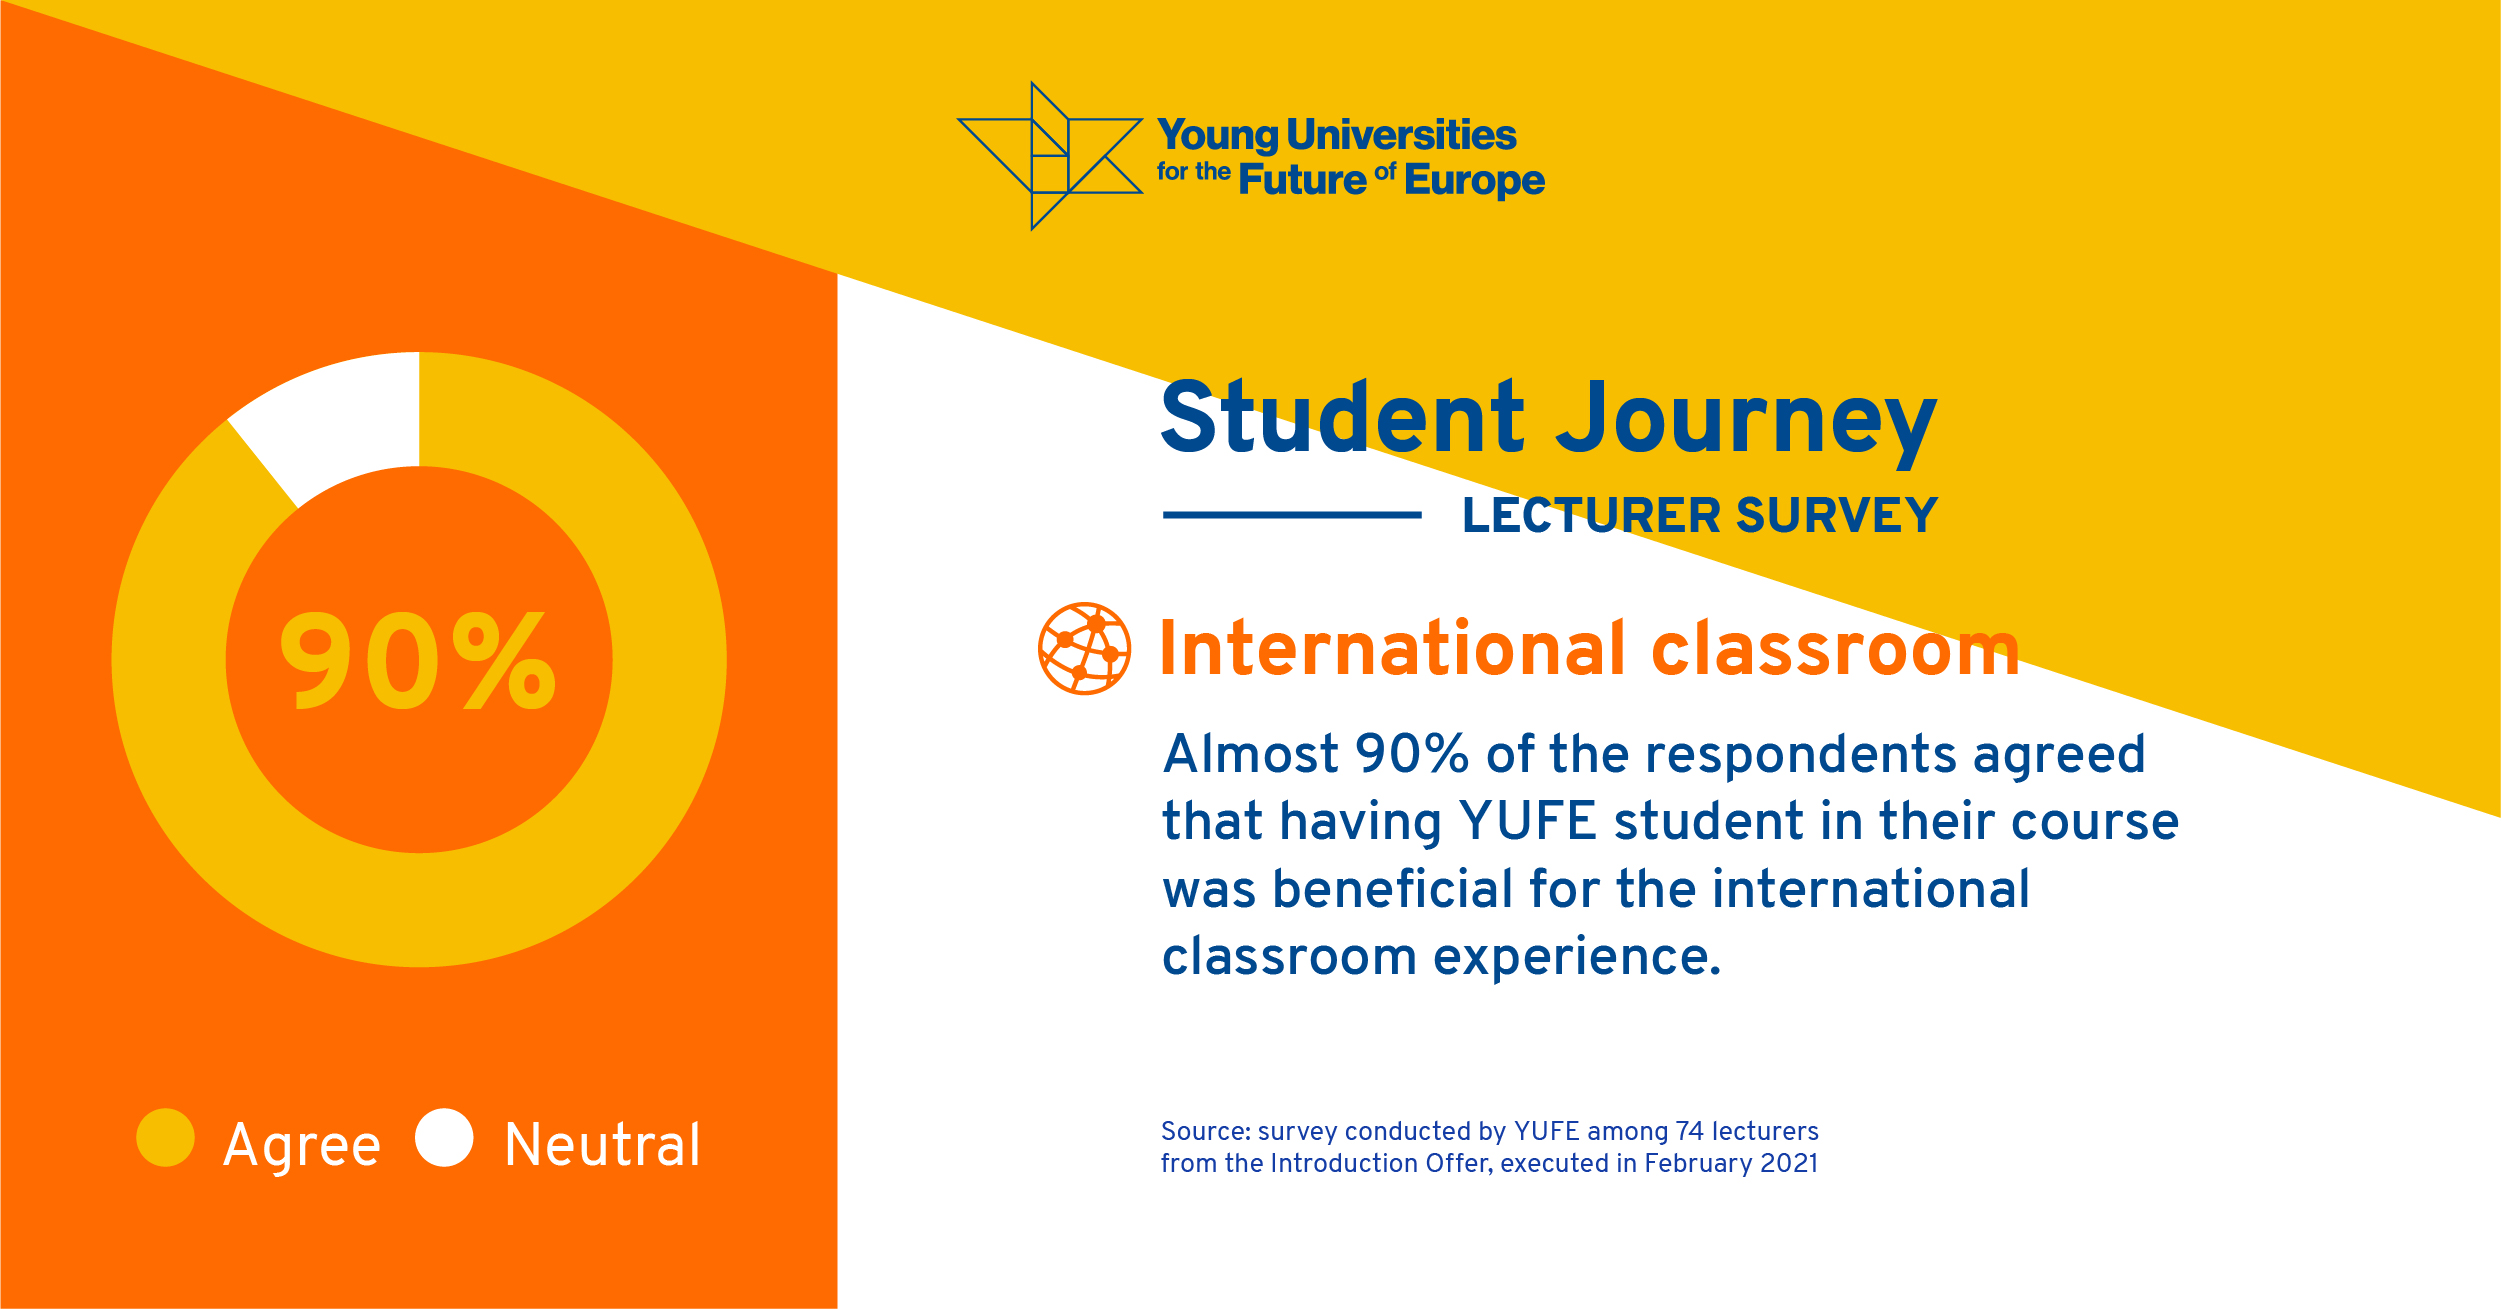 Almost 90% of the respondents agreed that having YUFE student in their course was beneficial for the international classroom experiencde. 